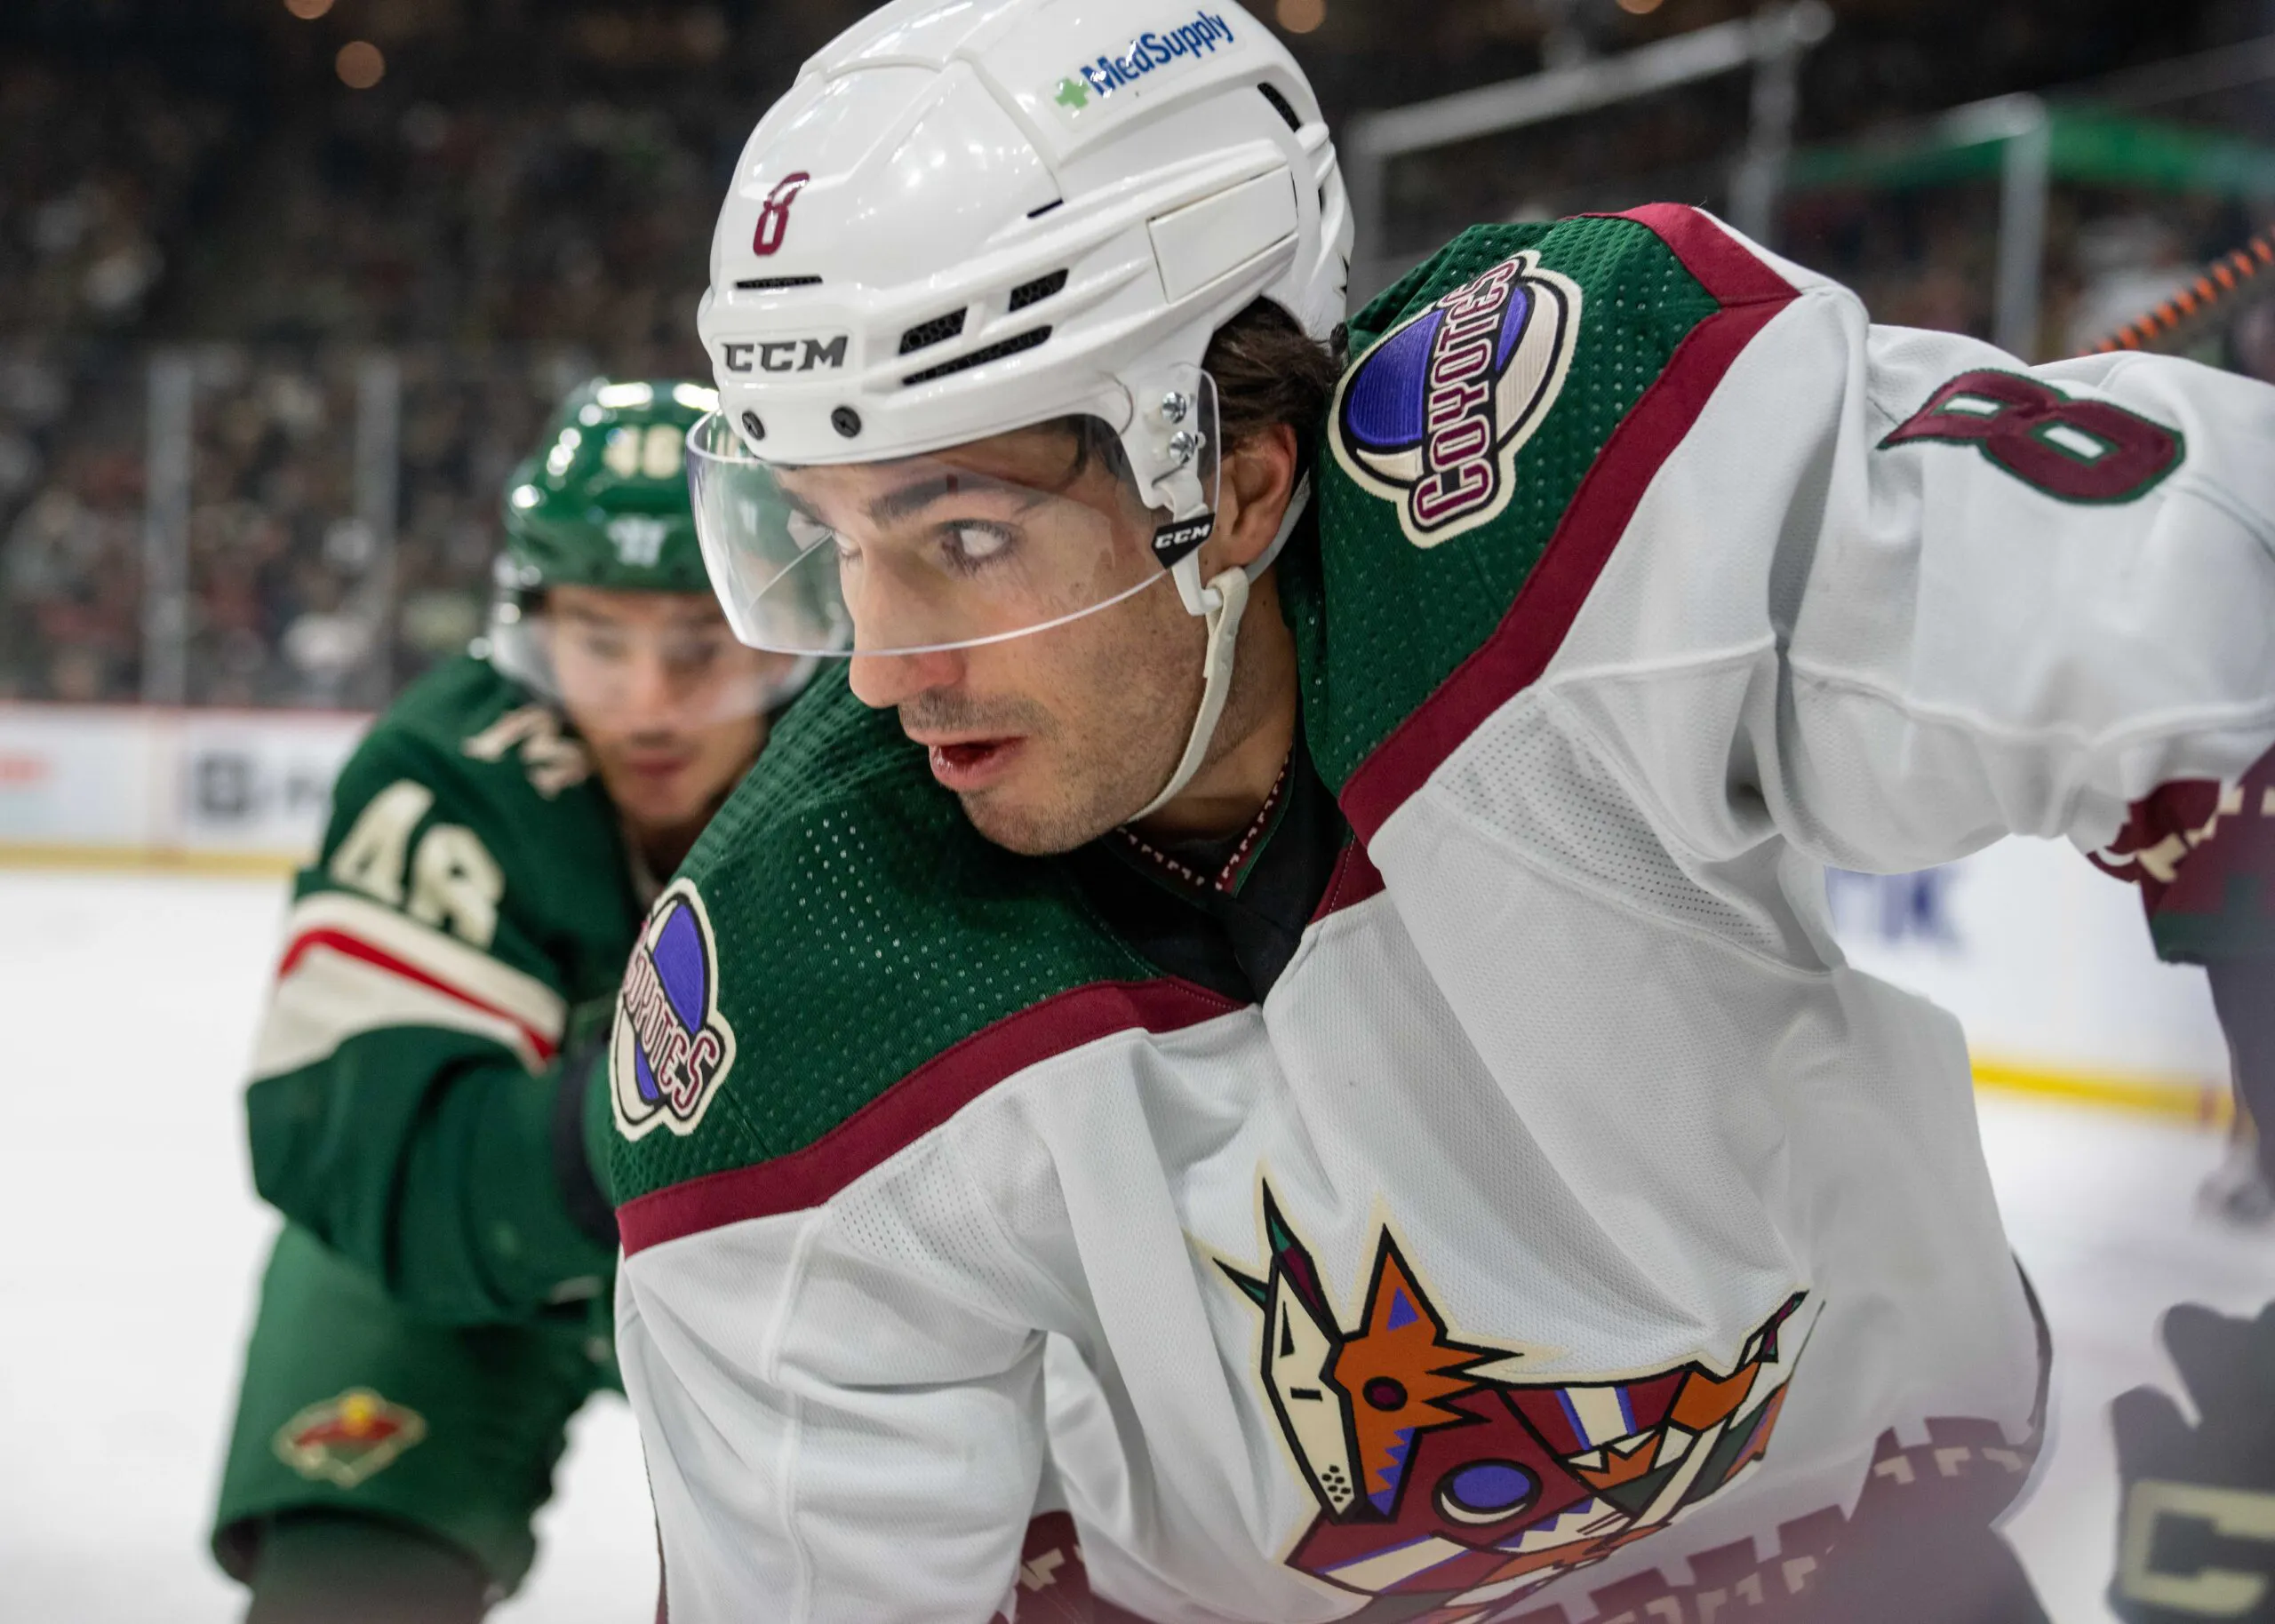 Arizona Coyotes forward Nick Schmaltz emerging as a ‘wild card’ leading up to the trade deadline